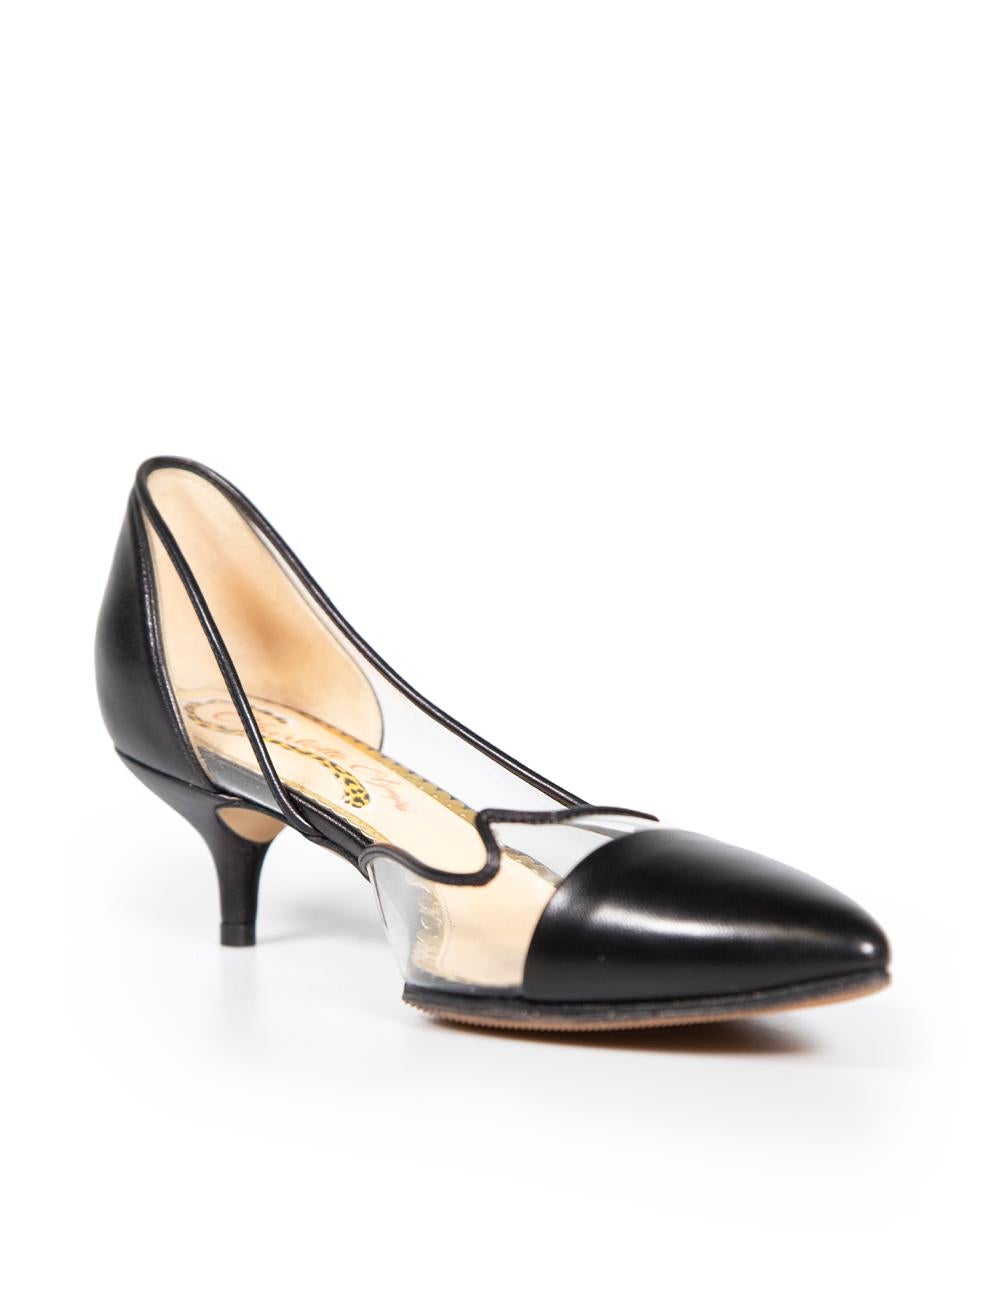 CONDITION is Very good. Hardly any visible wear to pumps is evident. However, these shoes has been partially re-soled on this used Charlotte Olympia designer resale item.
 
 
 
 Details
 
 
 Black
 
 PVC
 
 Slip on heels
 
 Contrast leather and PVC